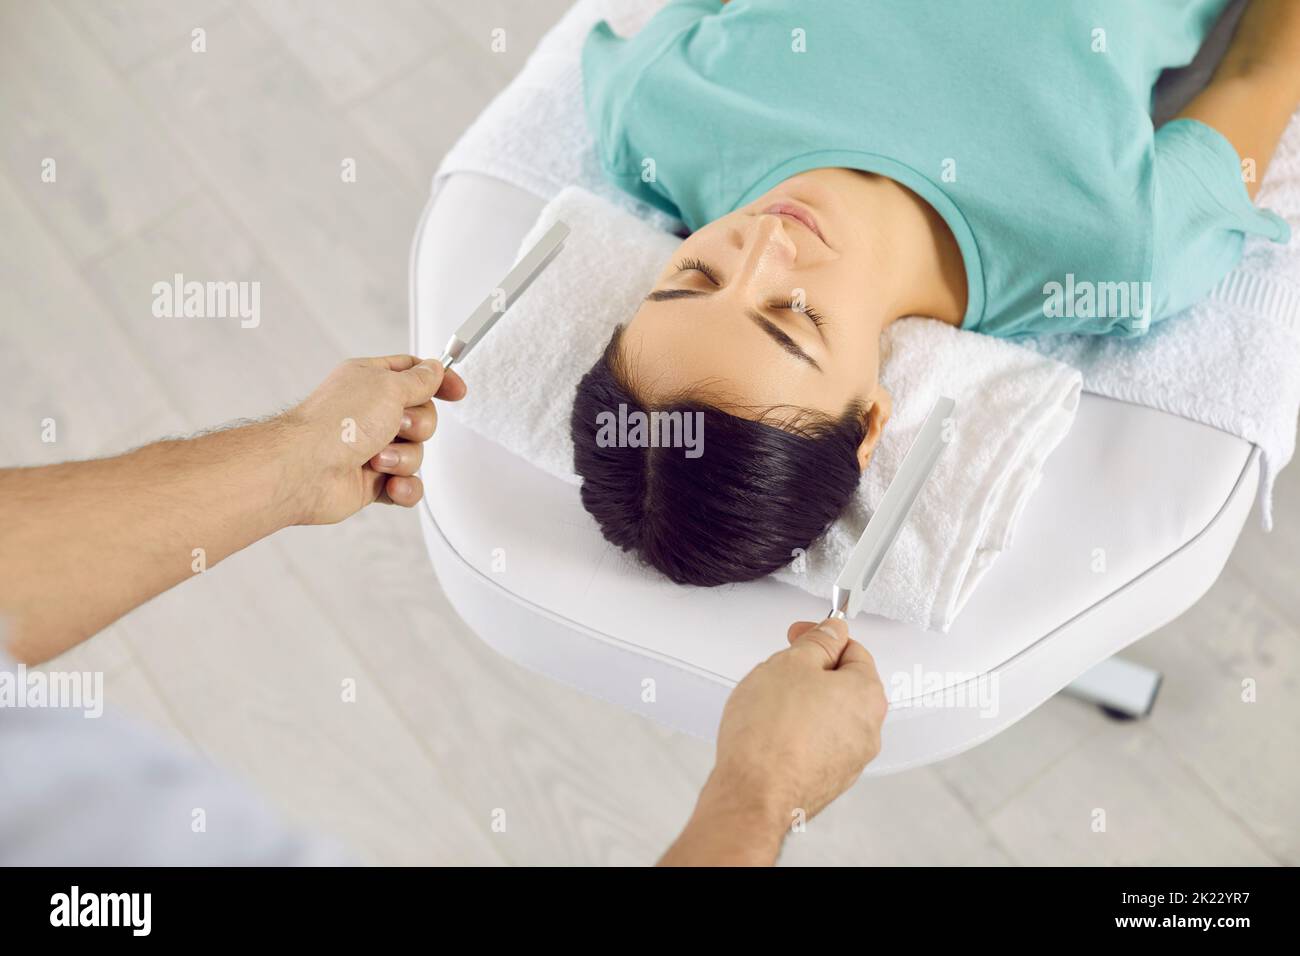 Holistic healer using two tuning forks during sound therapy session with young woman Stock Photo